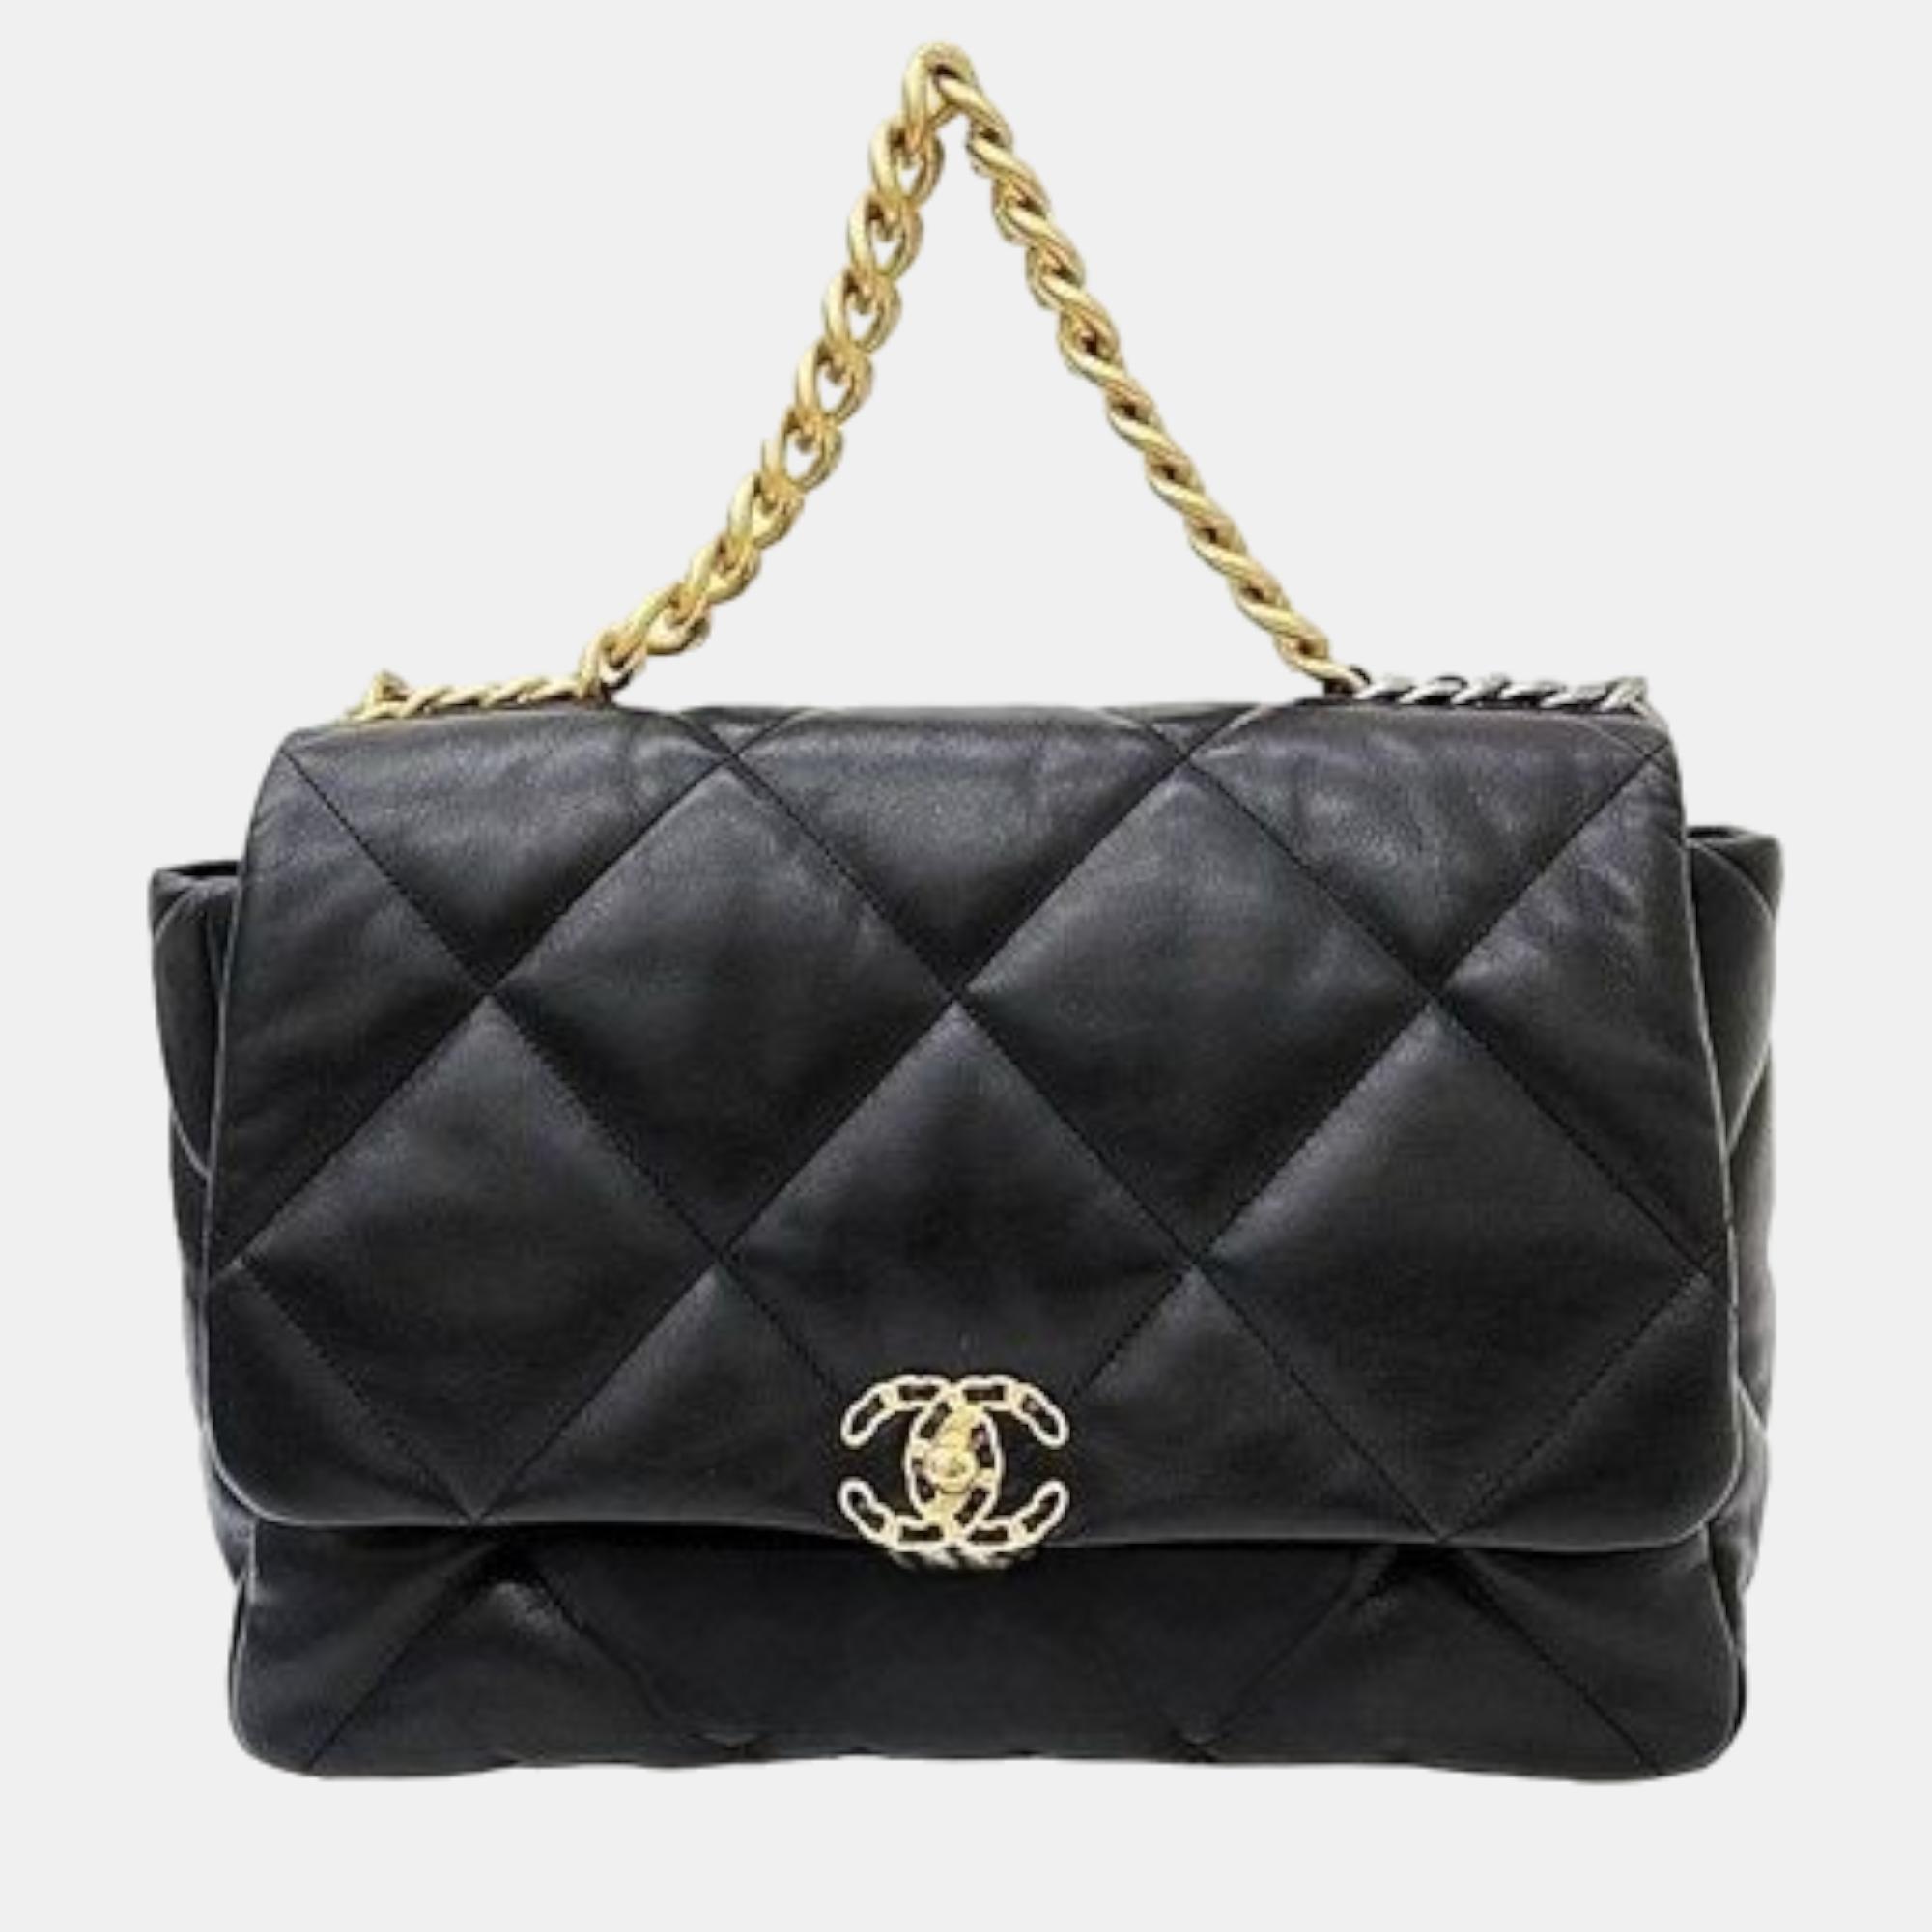 Indulge in luxury with this Chanel bag. Meticulously crafted from premium materials it combines exquisite design impeccable craftsmanship and timeless elegance. Elevate your style with this fashion accessory.